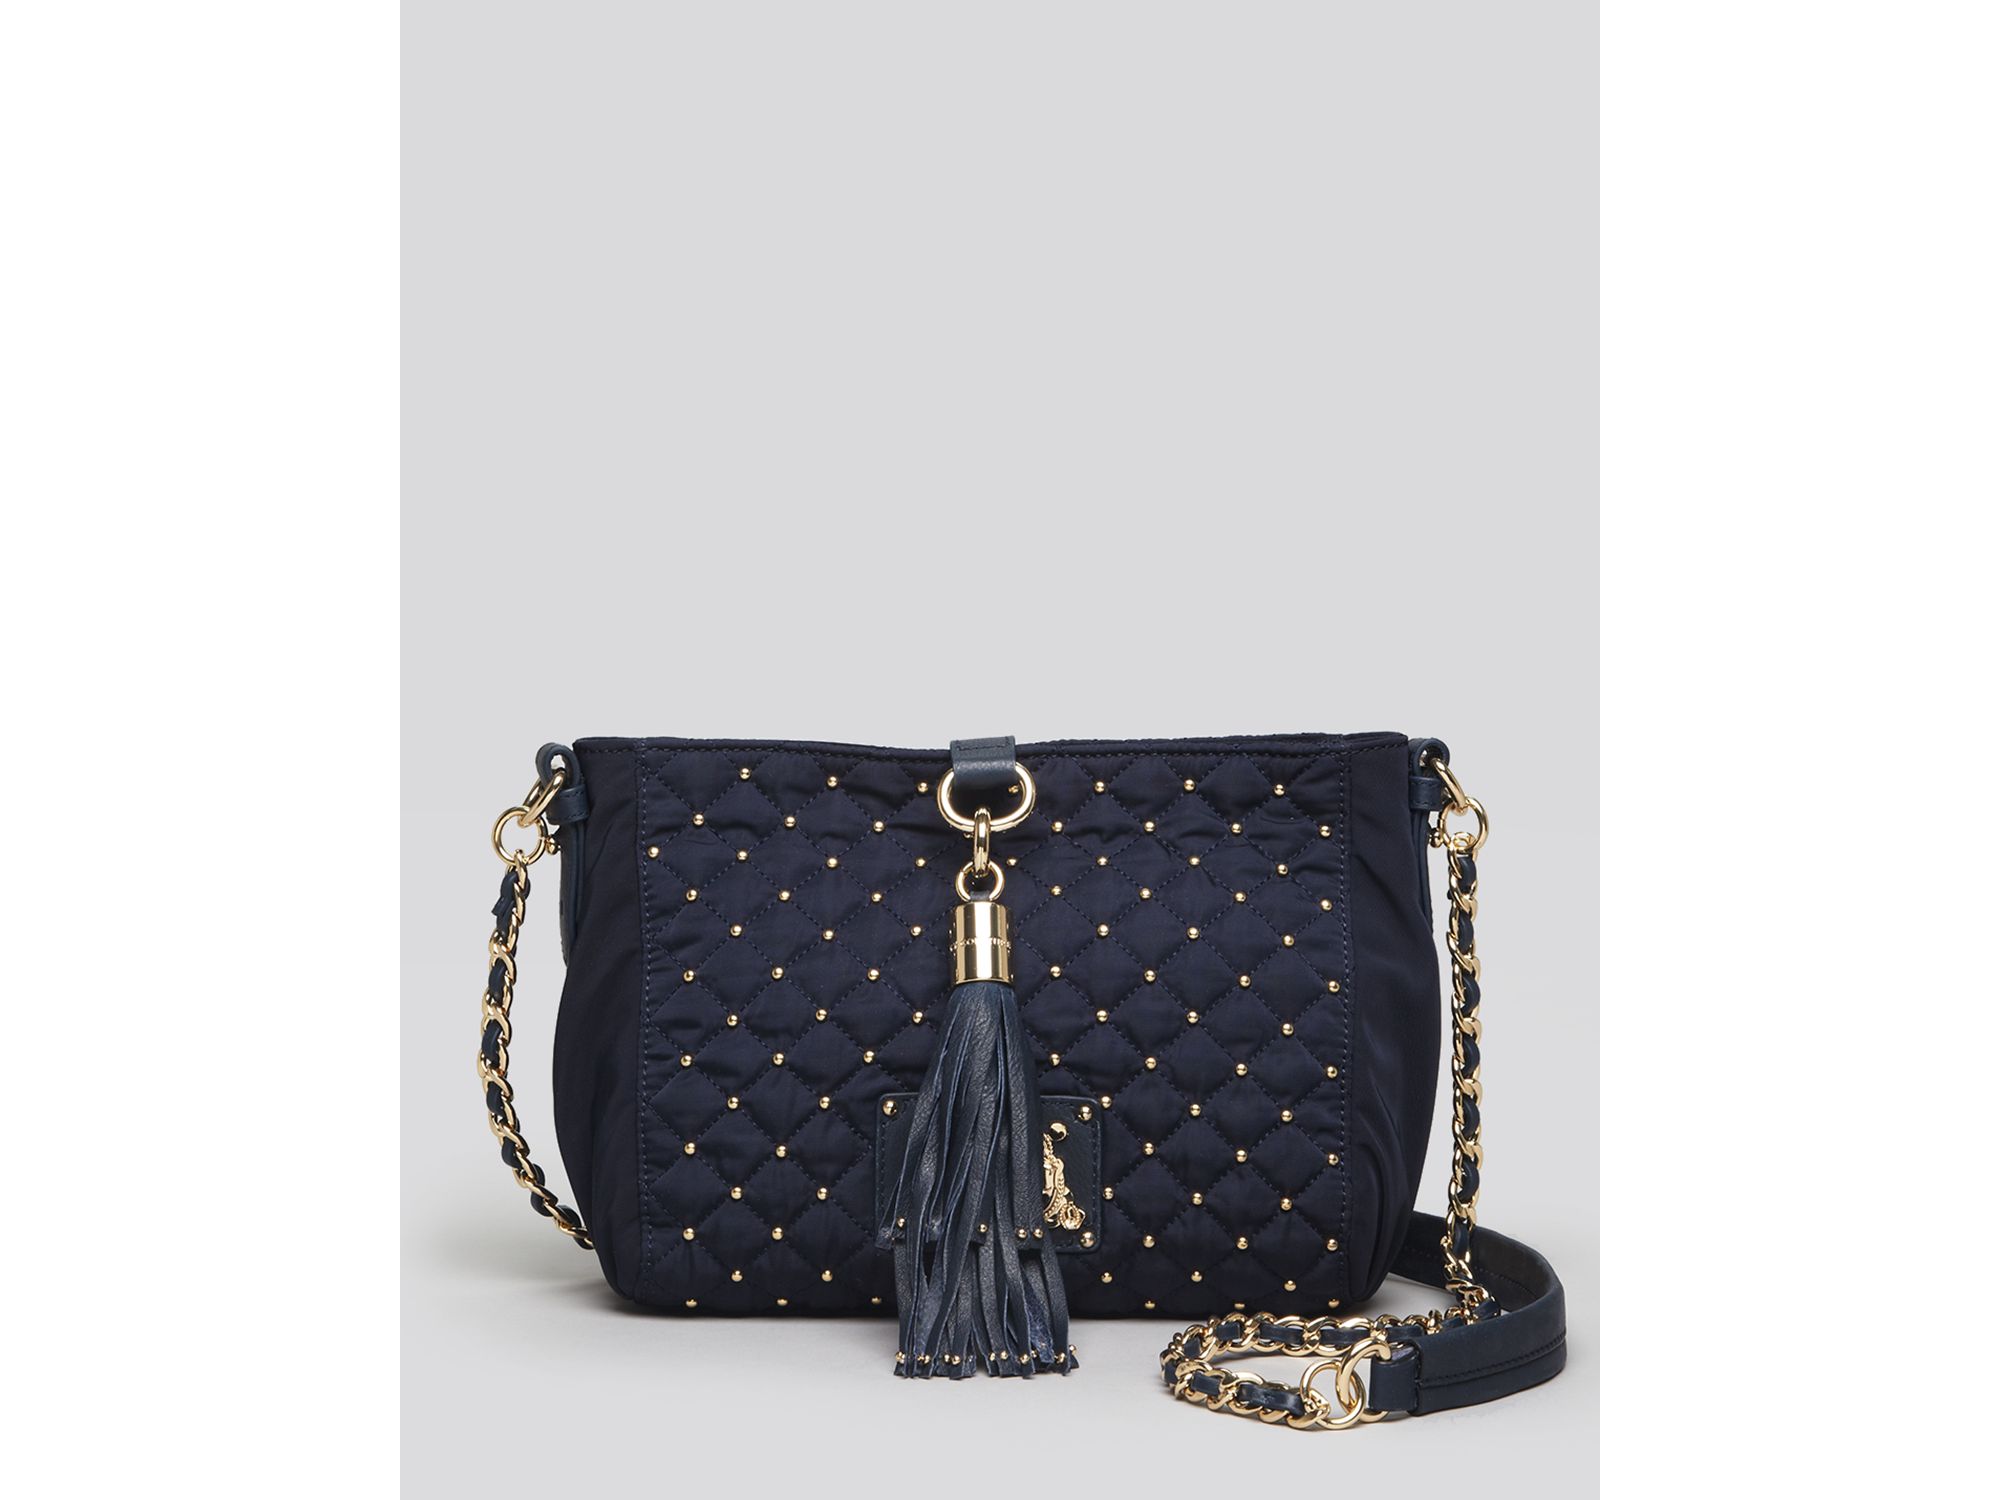 Lyst - Juicy Couture Quilted Nylon Crossbody Bag in Blue